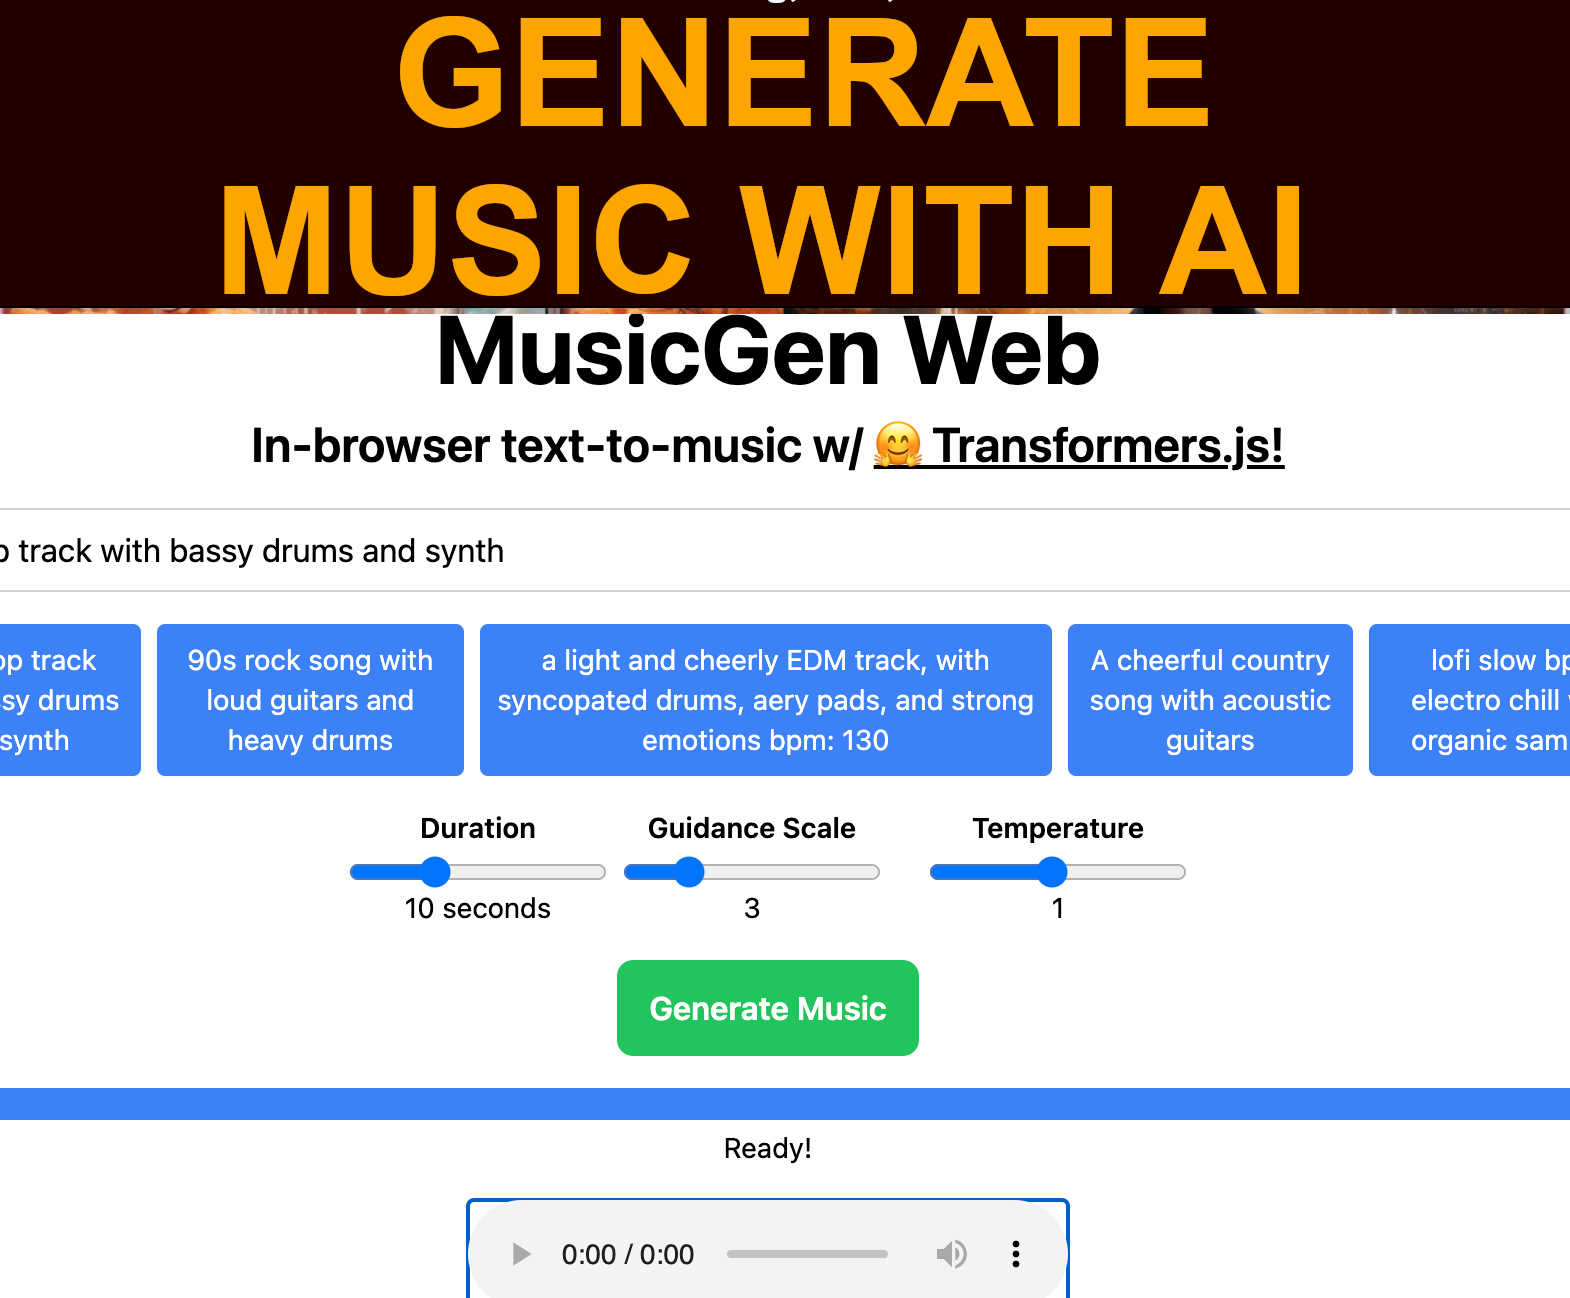 In-browser text-to-music w/ 🤗 Transformers.js!